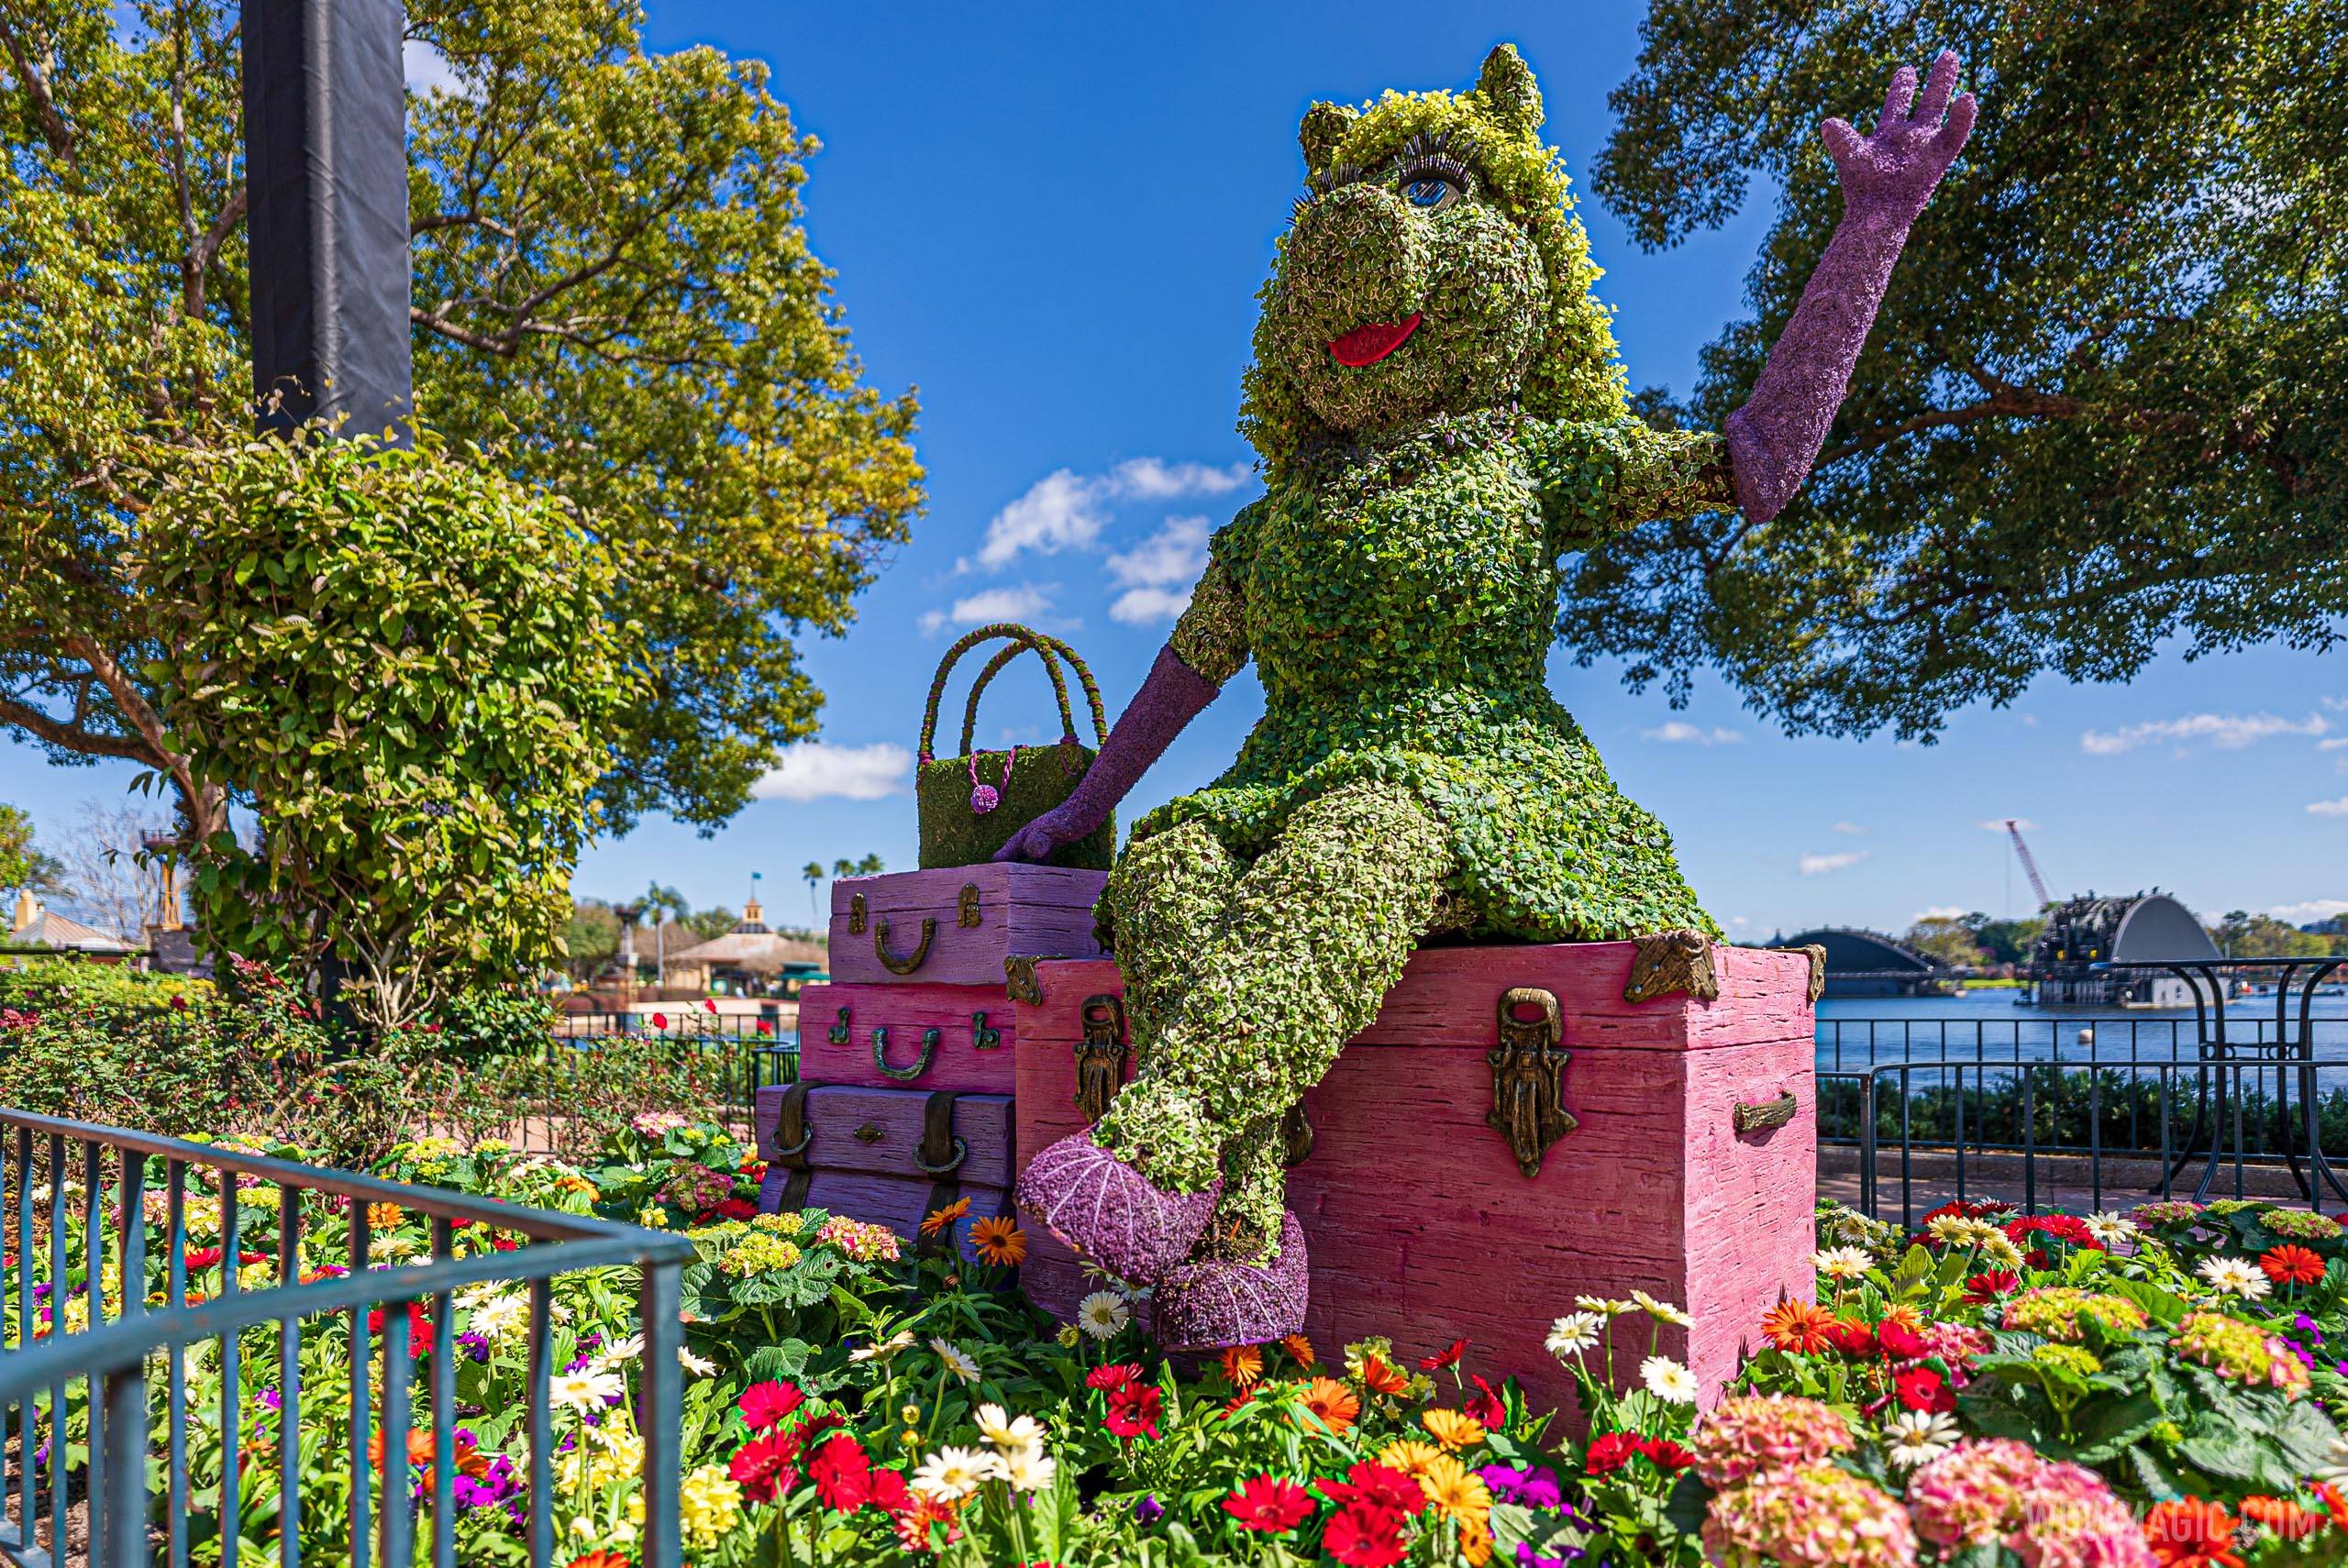 Miss Piggy – Between United Kingdom and Canada Pavilions